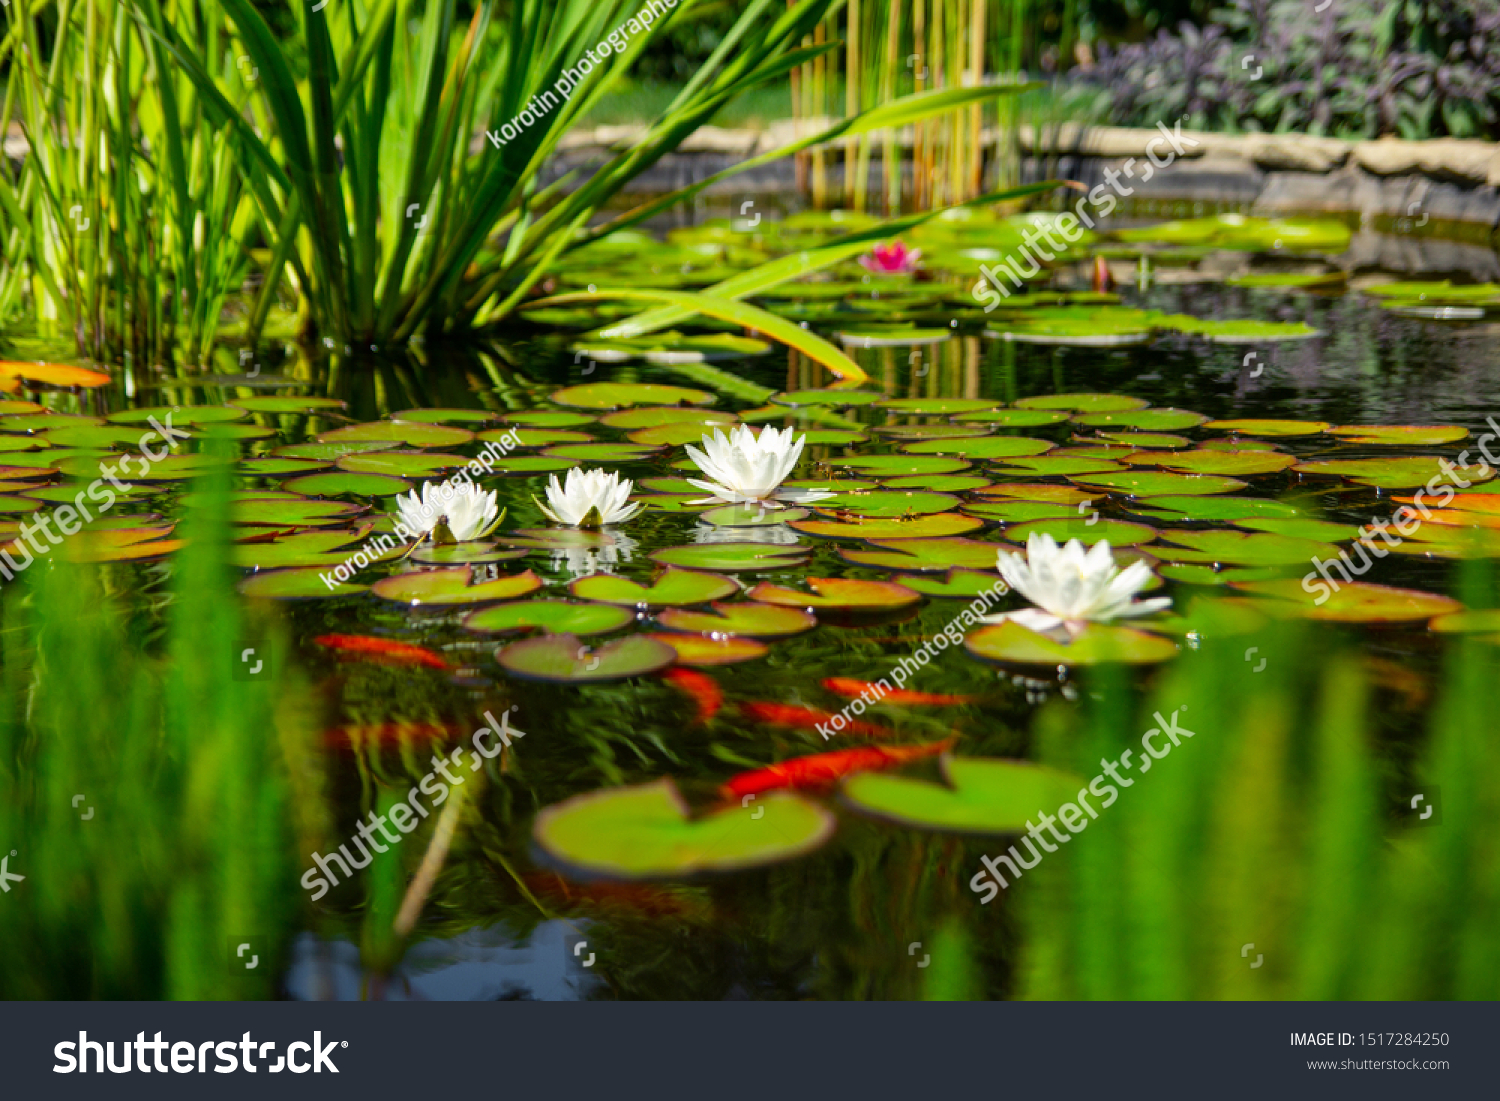 Homemade pond with fish and flowers #1517284250